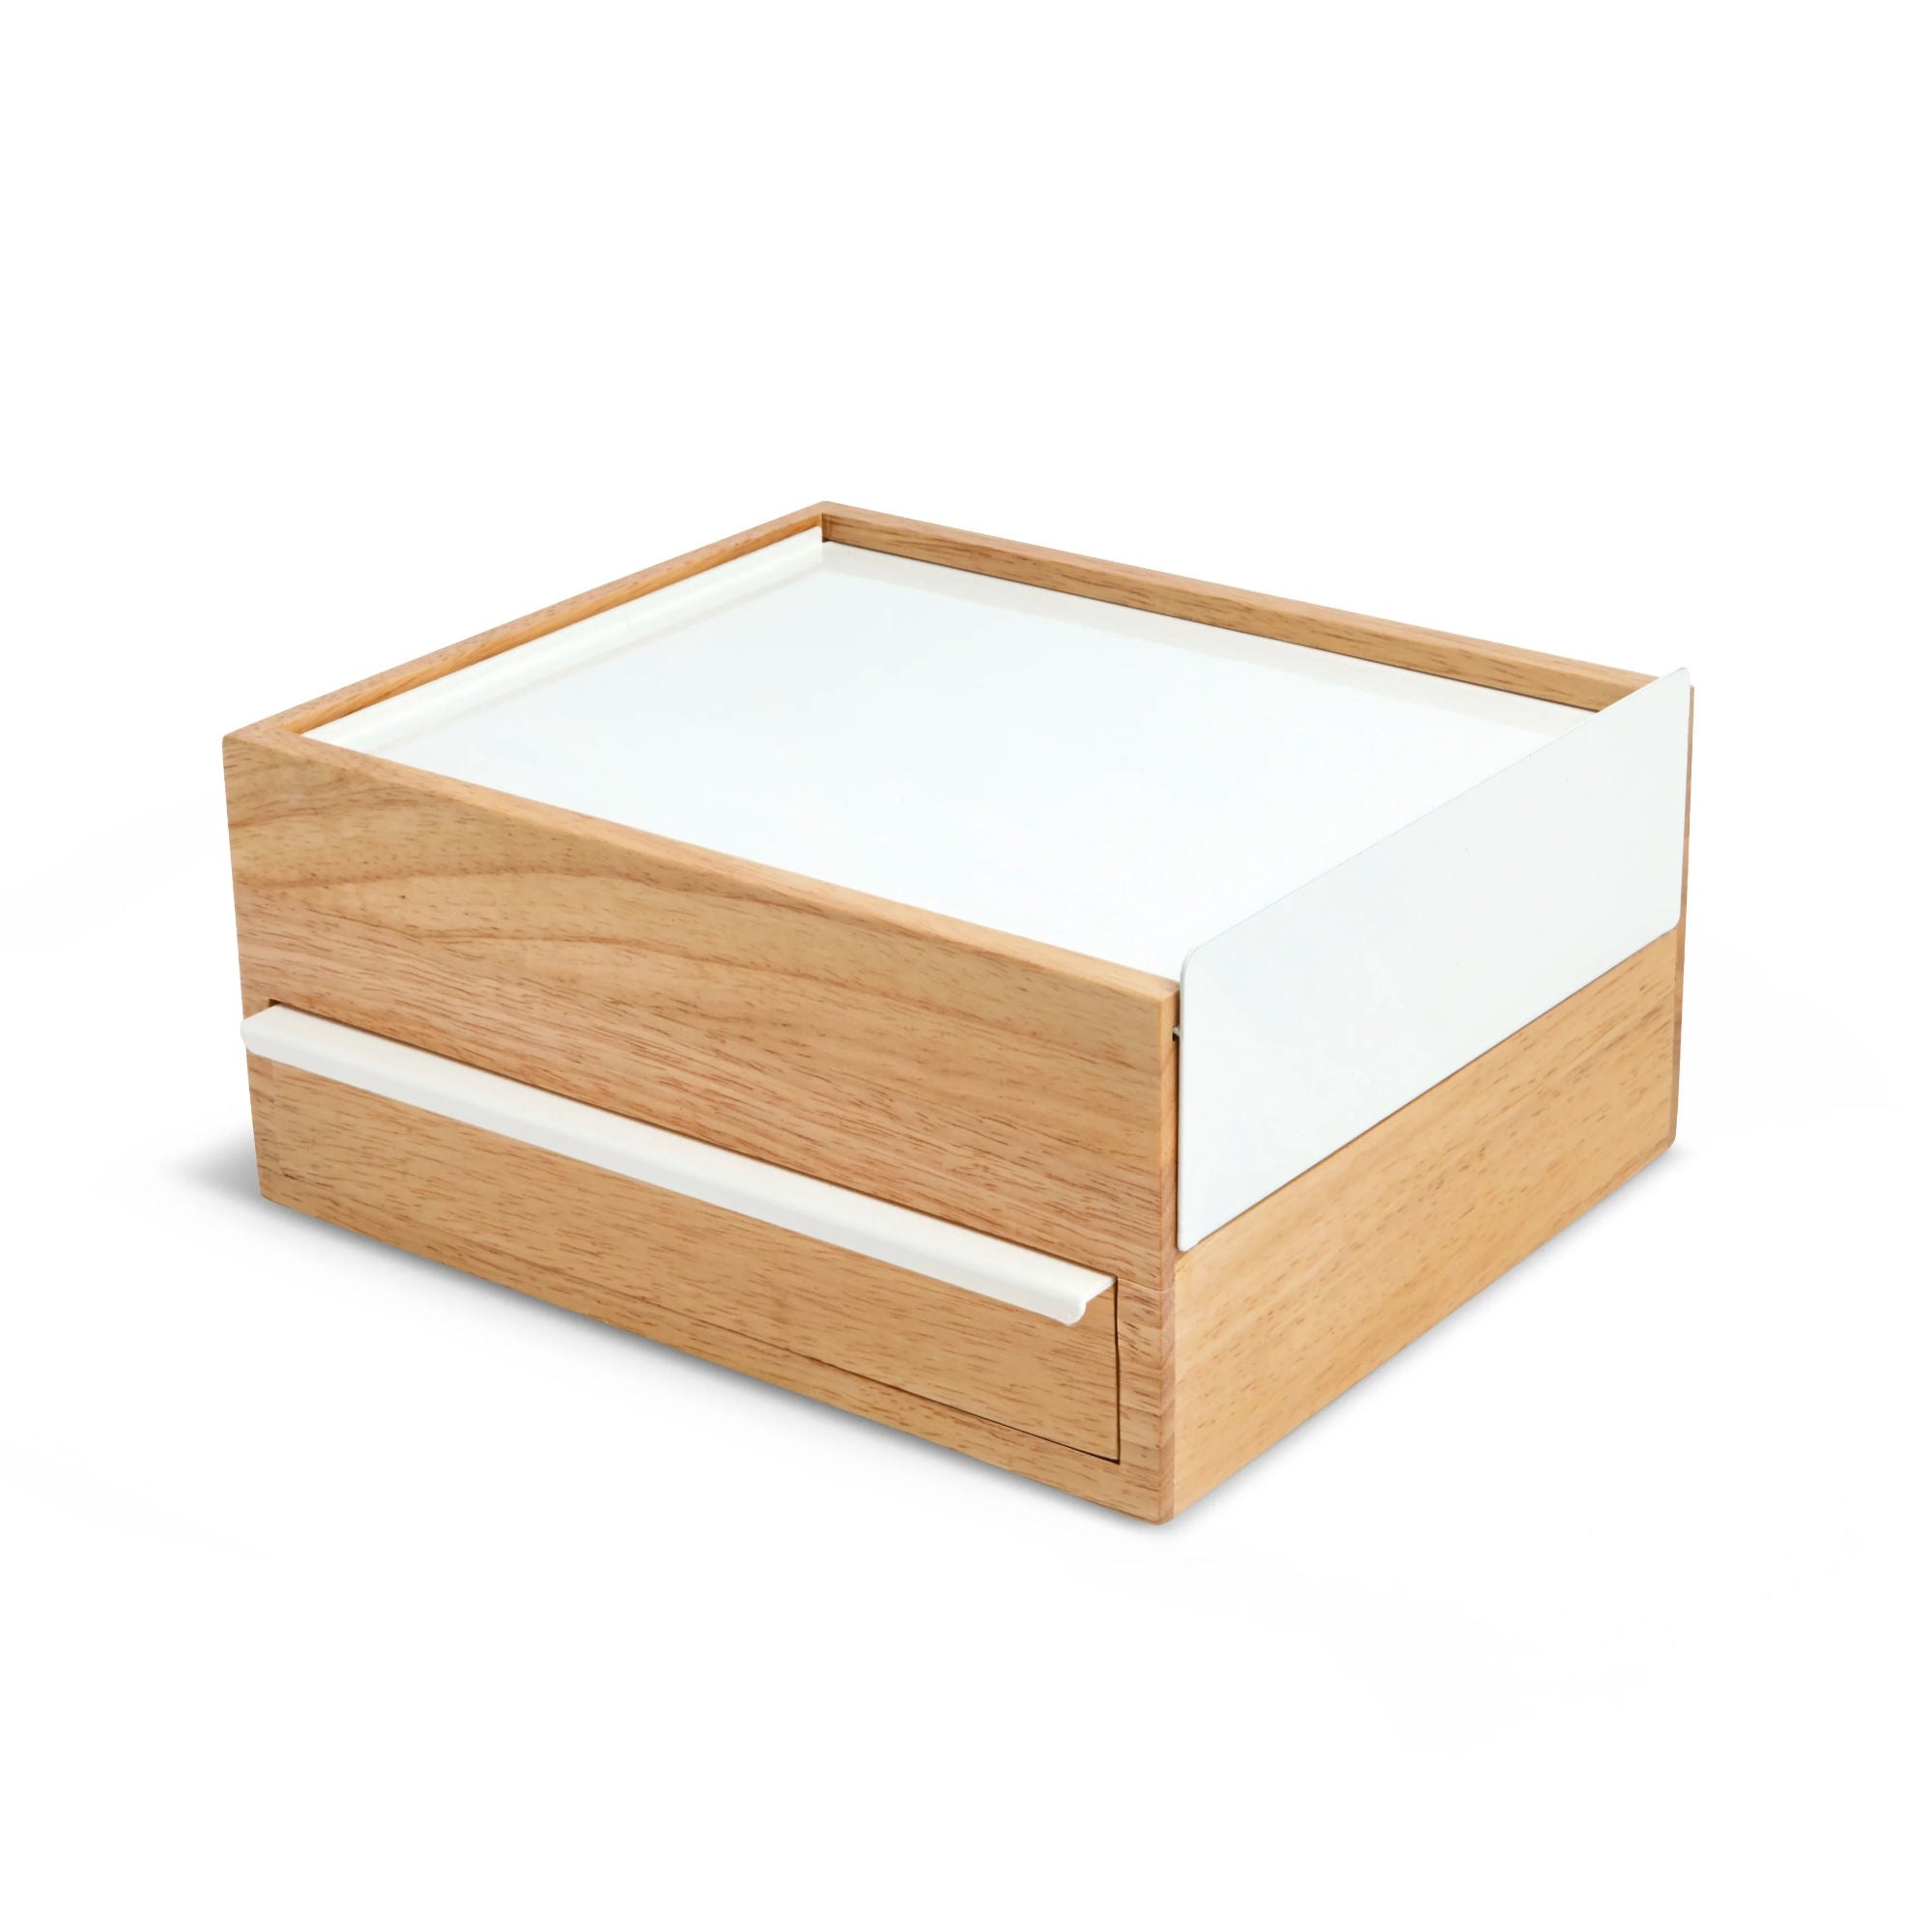 Umbra Stowit jewelry box natural, large